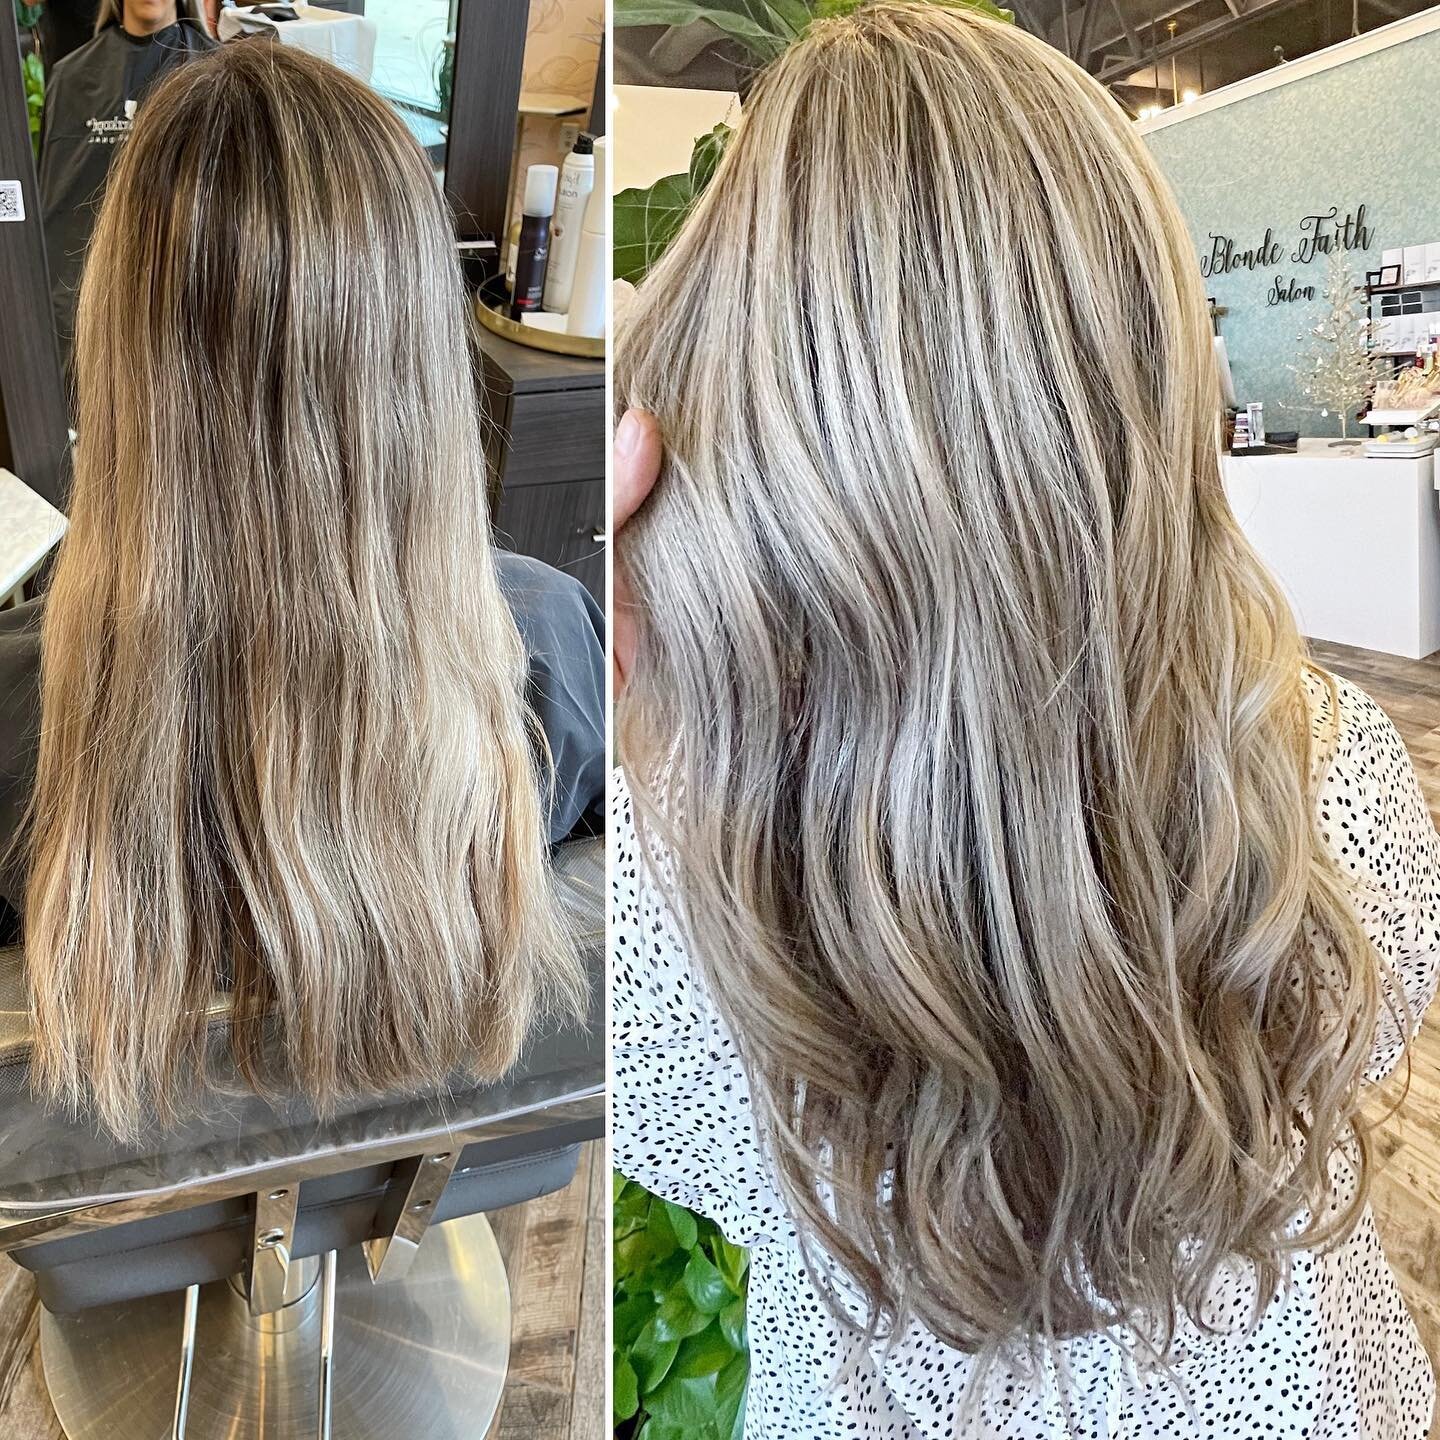 BRAND. NEW.💅🏼
Nothing like a Milbon treatment recharge. Her hair literally felt like a different head of hair when she left our salon, y&rsquo;all! 
Mini foil and treatment by Lexie @lexieloxx 
&bull;
&bull;
Book online 24/7 or DM for a consult.
&b